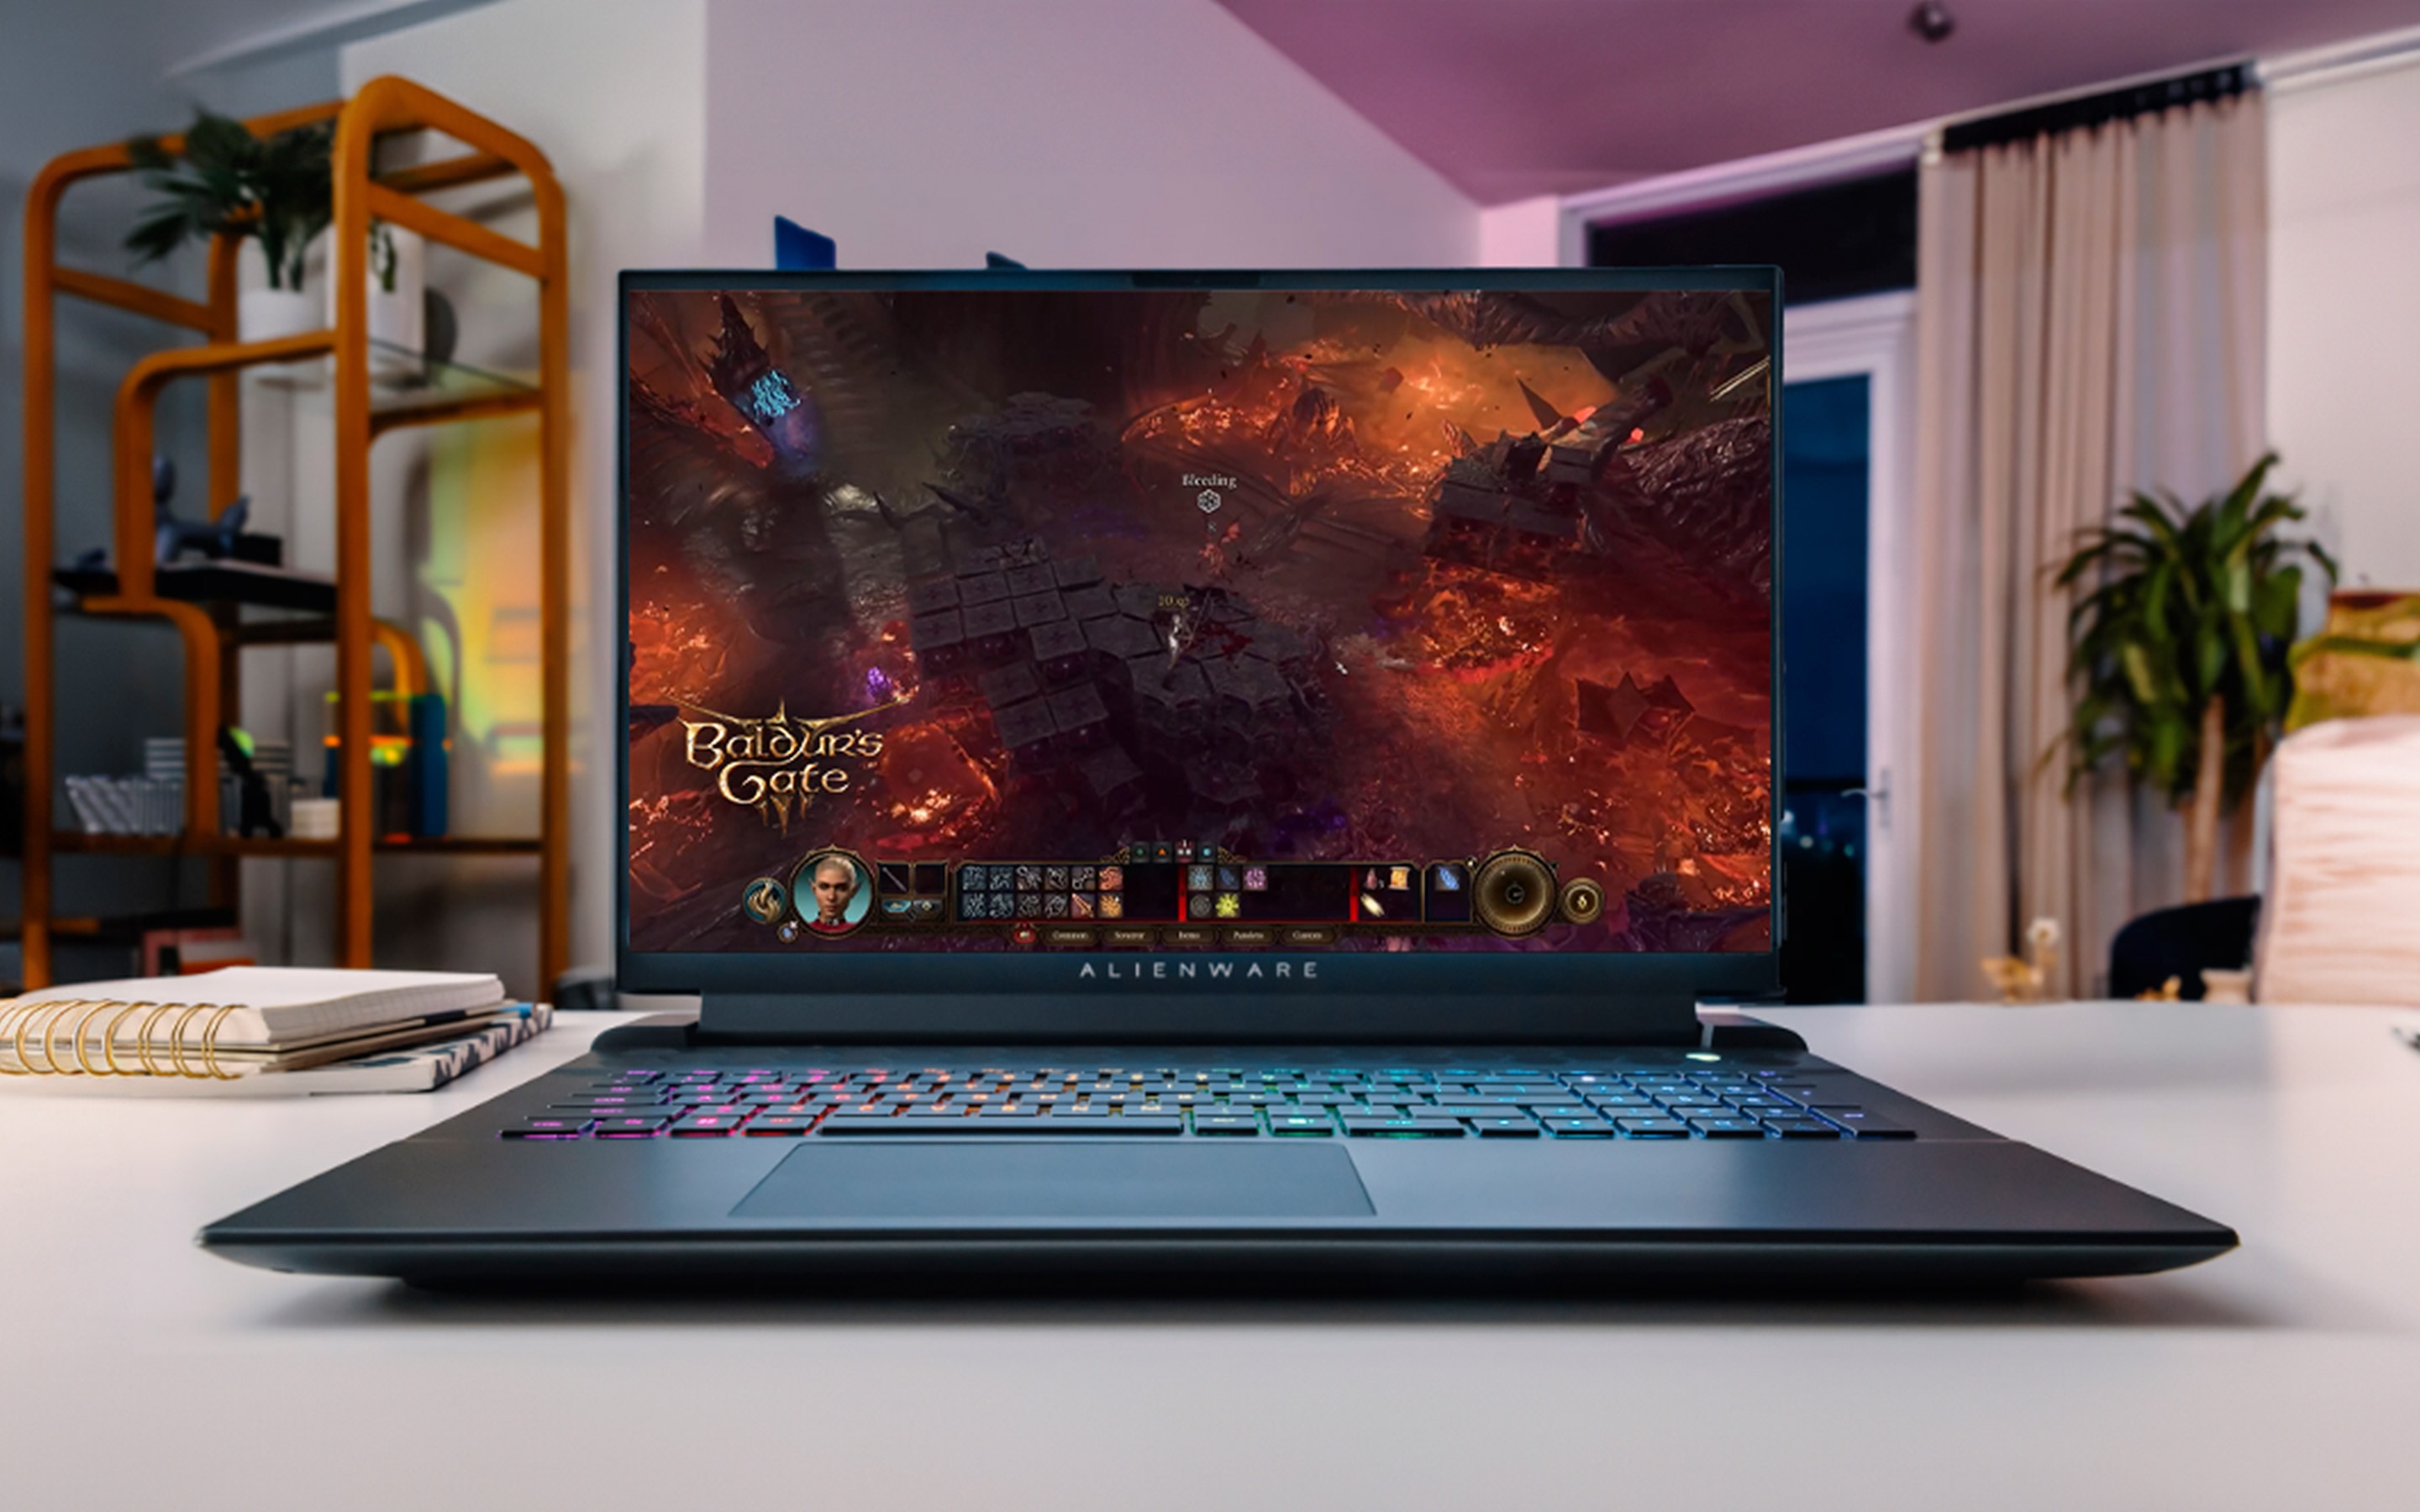 Frontal view of an Alienware M18 R2 laptop positioned on a table within a living room setting, showcasing dyanmic gameplay from Baldur's Gate animated vividly on its screen. 